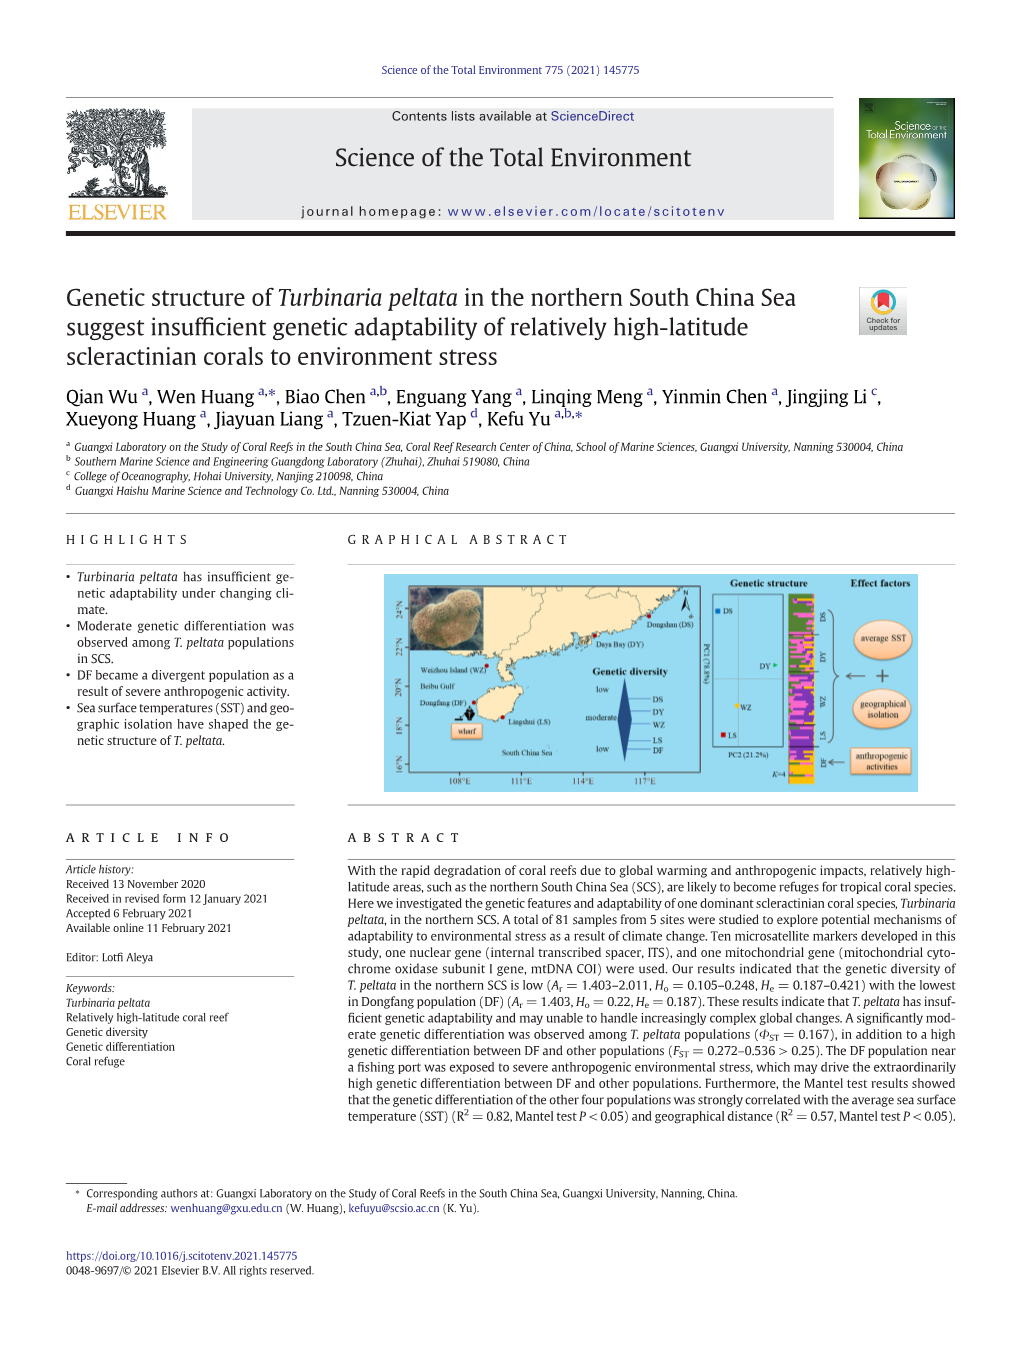 Genetic Structure of Turbinaria Peltata in the Northern South China Sea